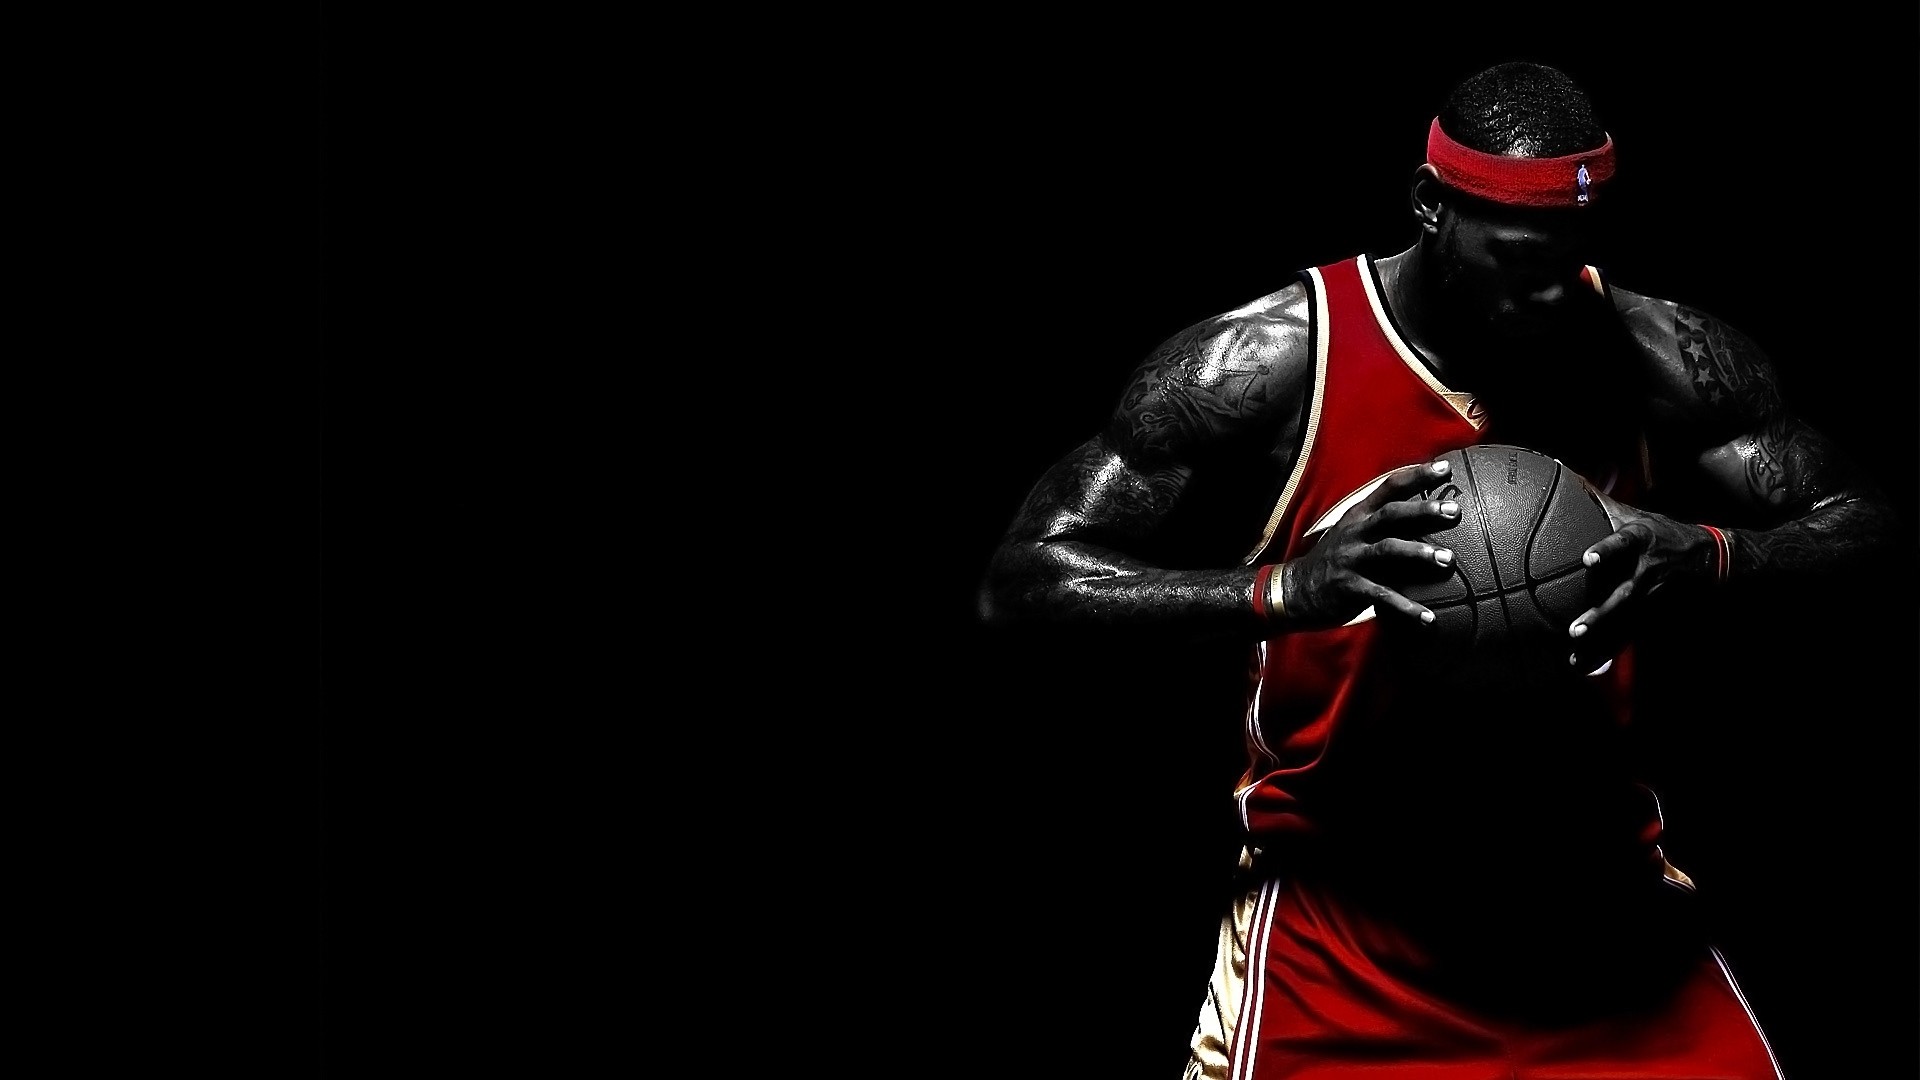 1920x1080 Cool Basketball Wallpapers FRW5g7 Cool Basketball Wallpapers s352b5k Cool  Basketball Wallpapers cool basketball wallpapers 15E ...